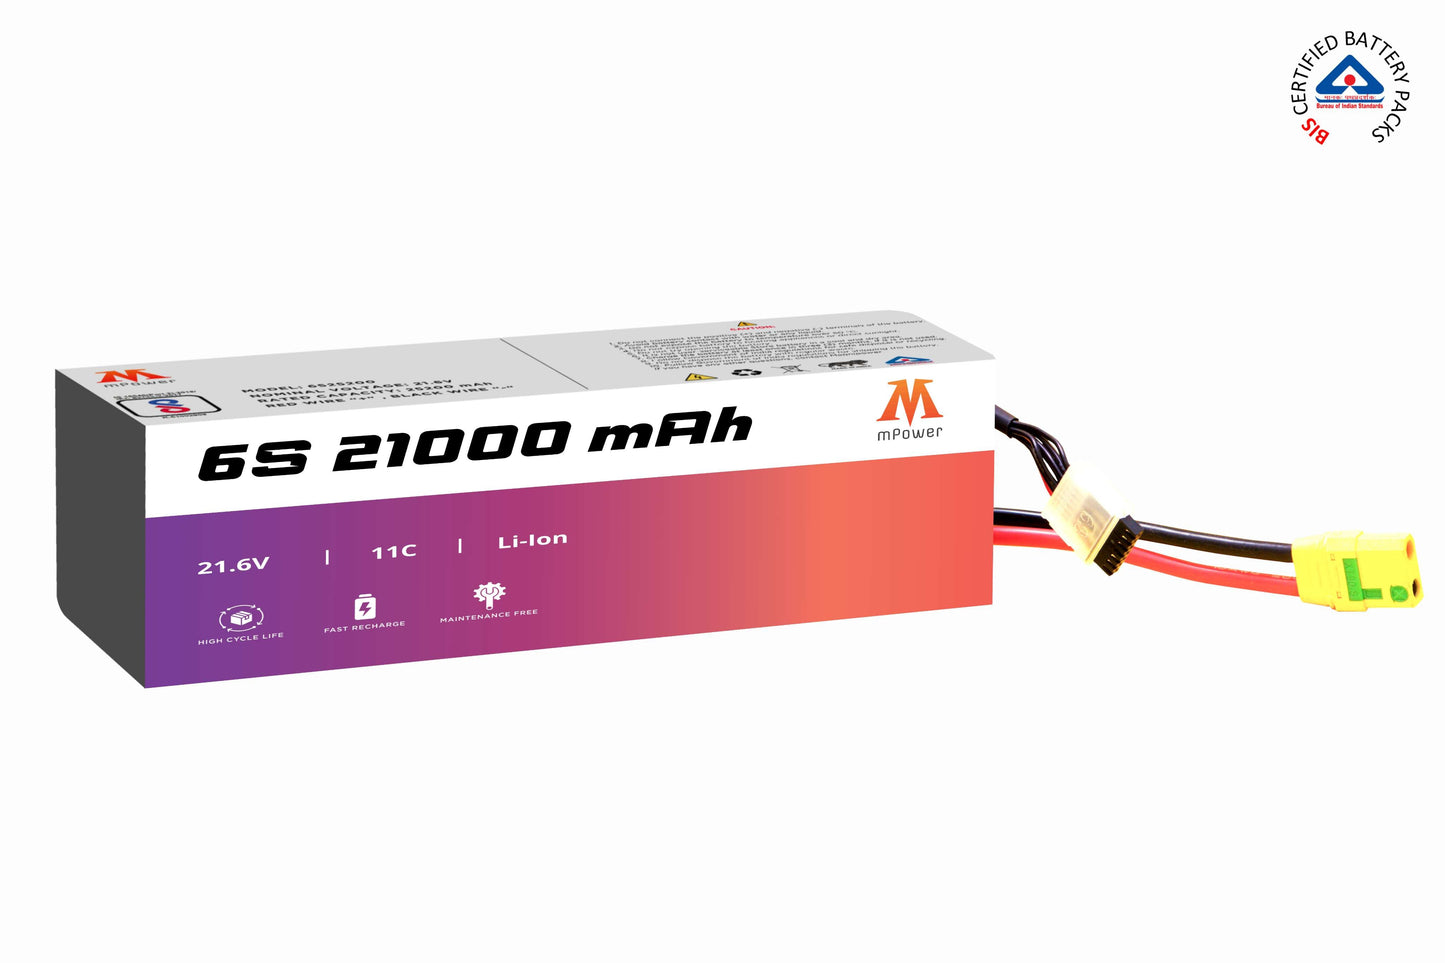 mPower 6S 21000mAh Lithium-ion Battery for Agricultural Spraying Drones